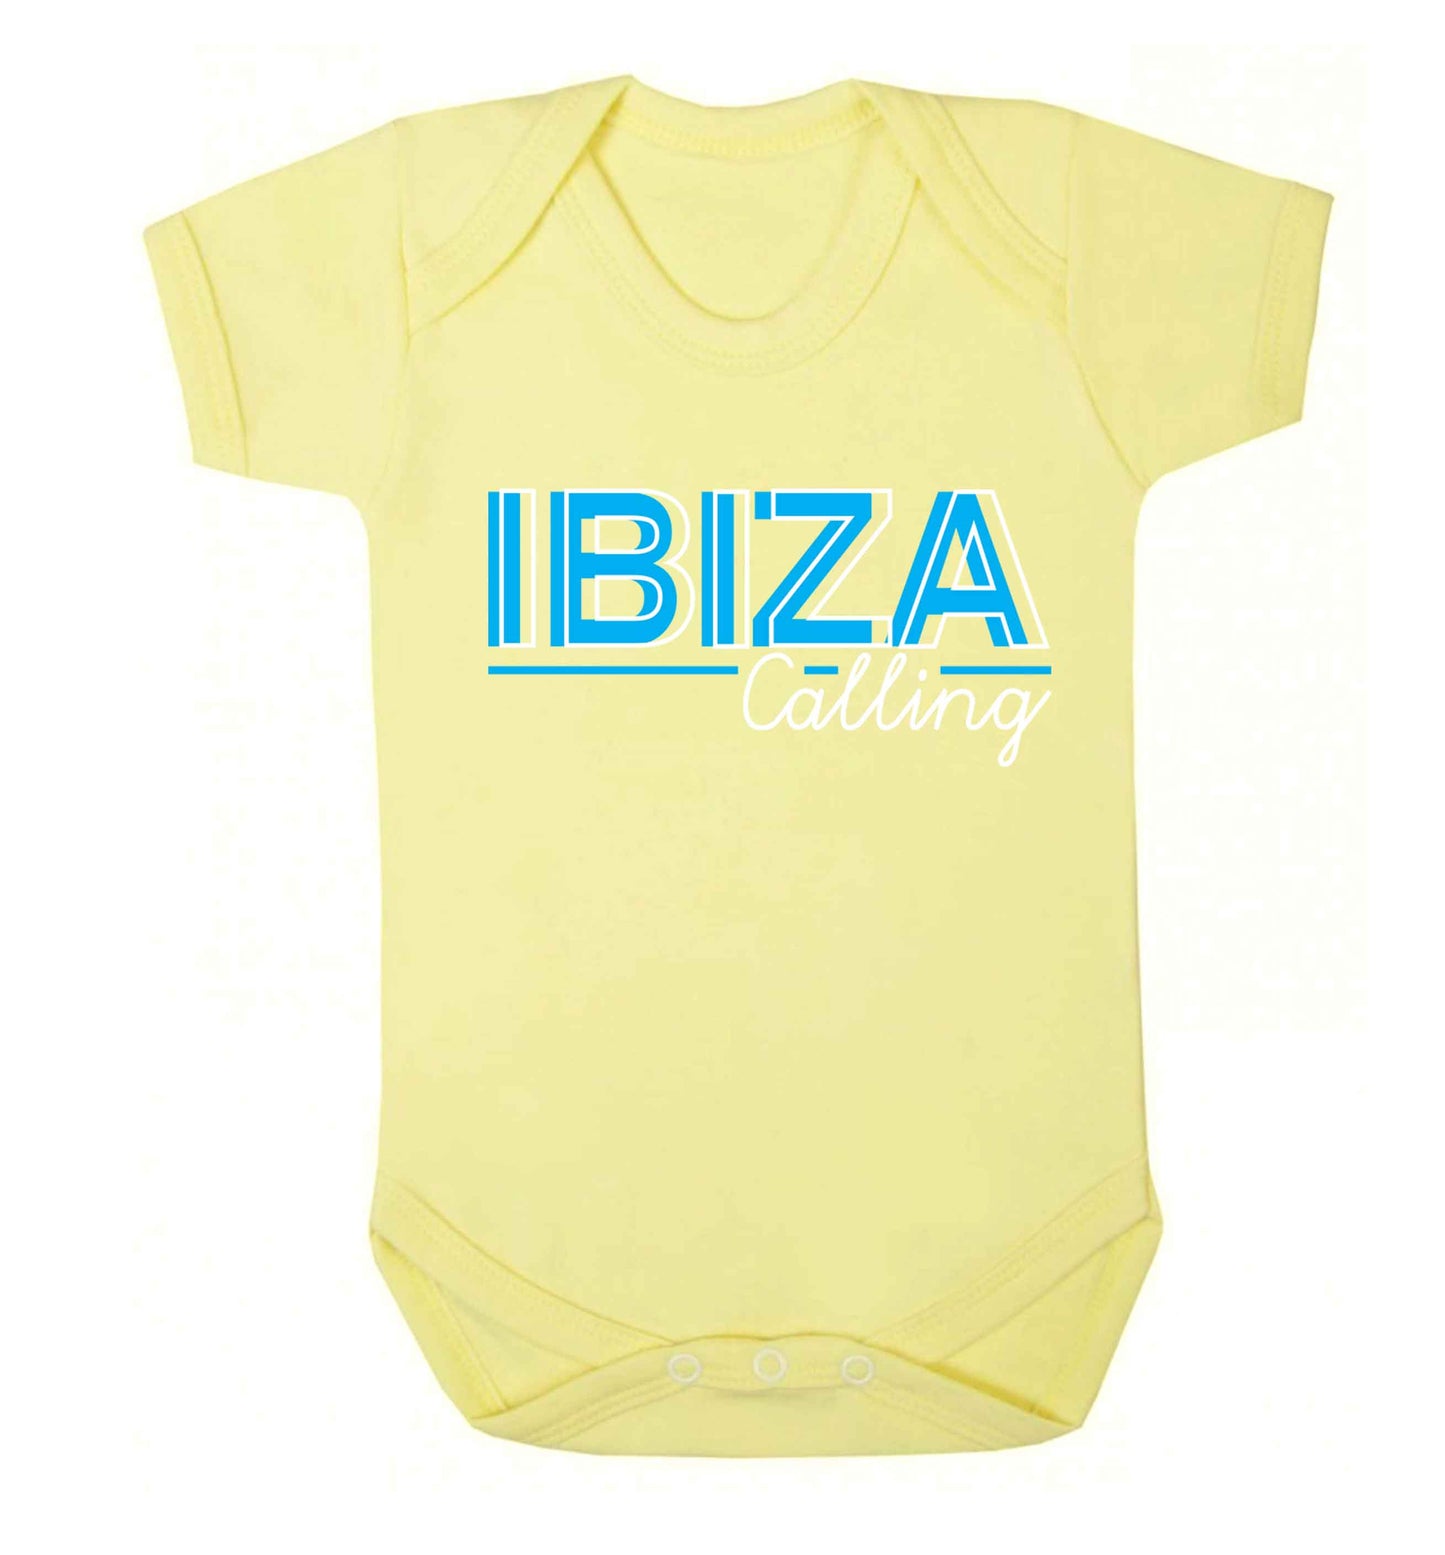 Ibiza calling Baby Vest pale yellow 18-24 months